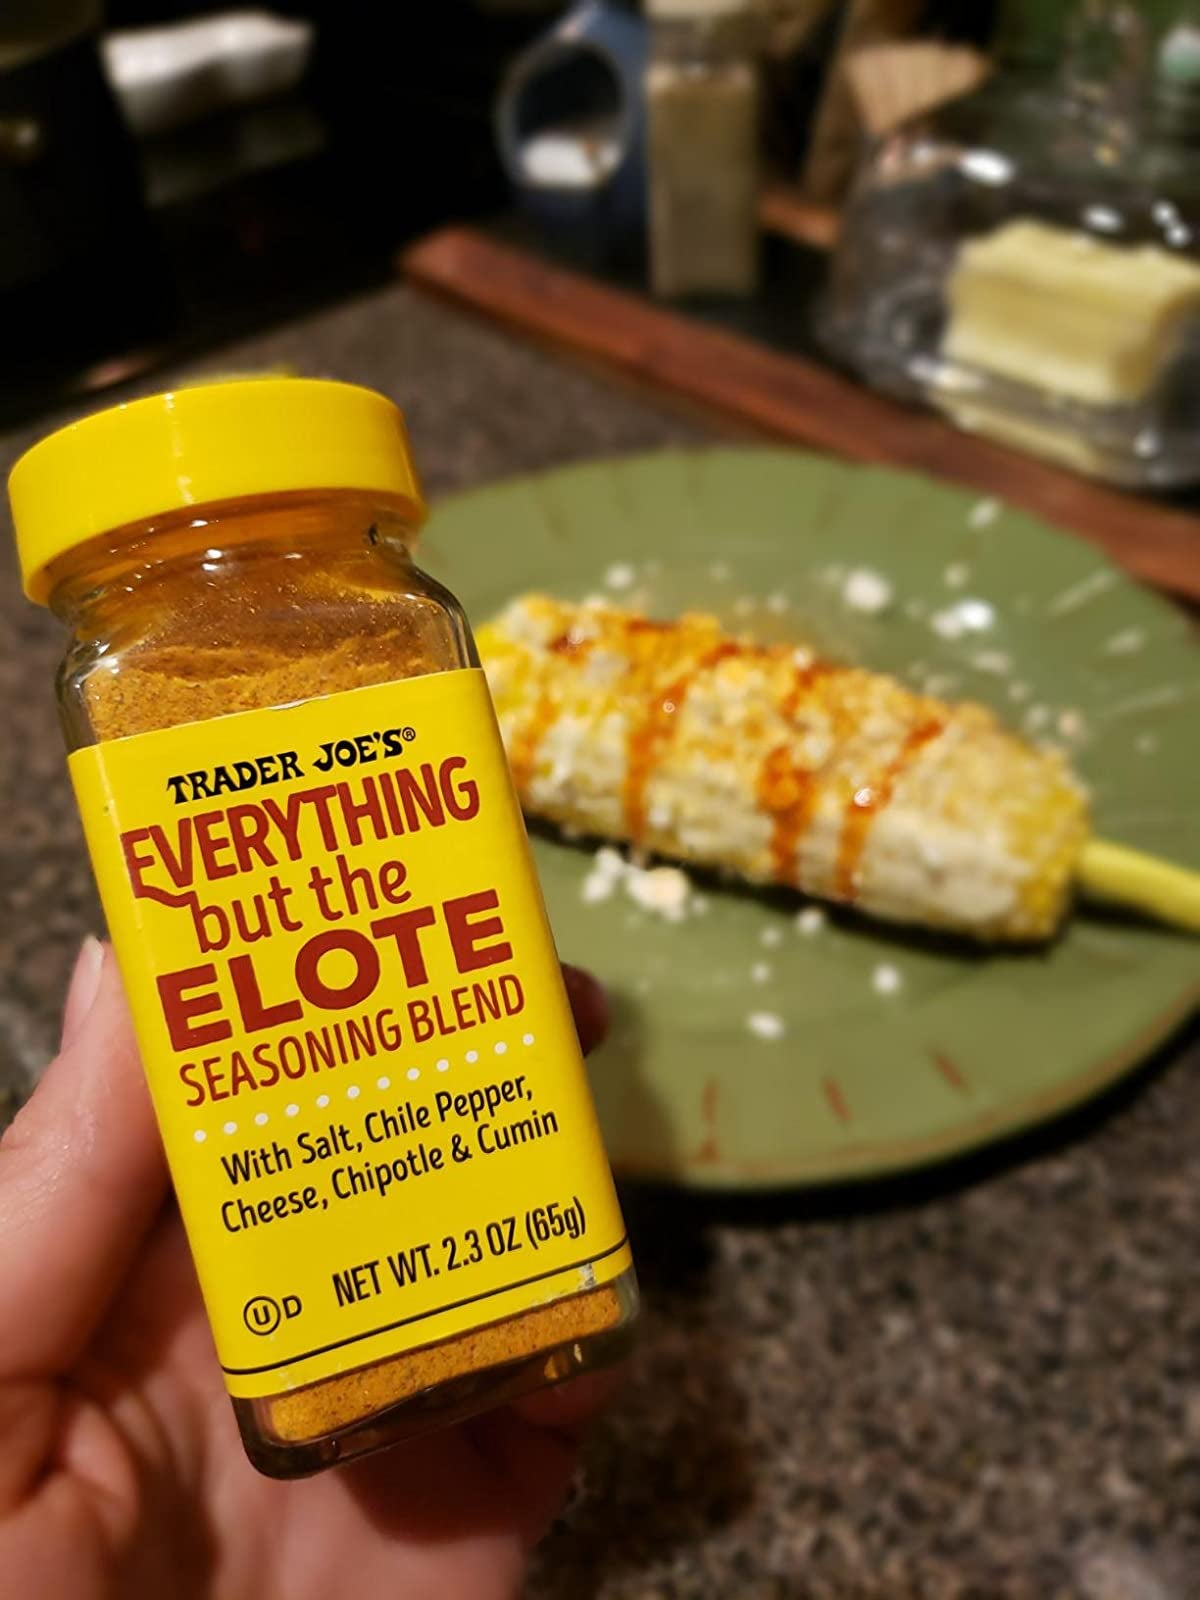  Trader Joe's Everything But The Elote Seasoning Blend 2.3 Oz!  Mix Of Salt, Chili Pepper, Cheese, Chipotle, And Cumin! Perfect For Your  Tasty Homemade Elote Mexican Snack! Choose Your Pack! (